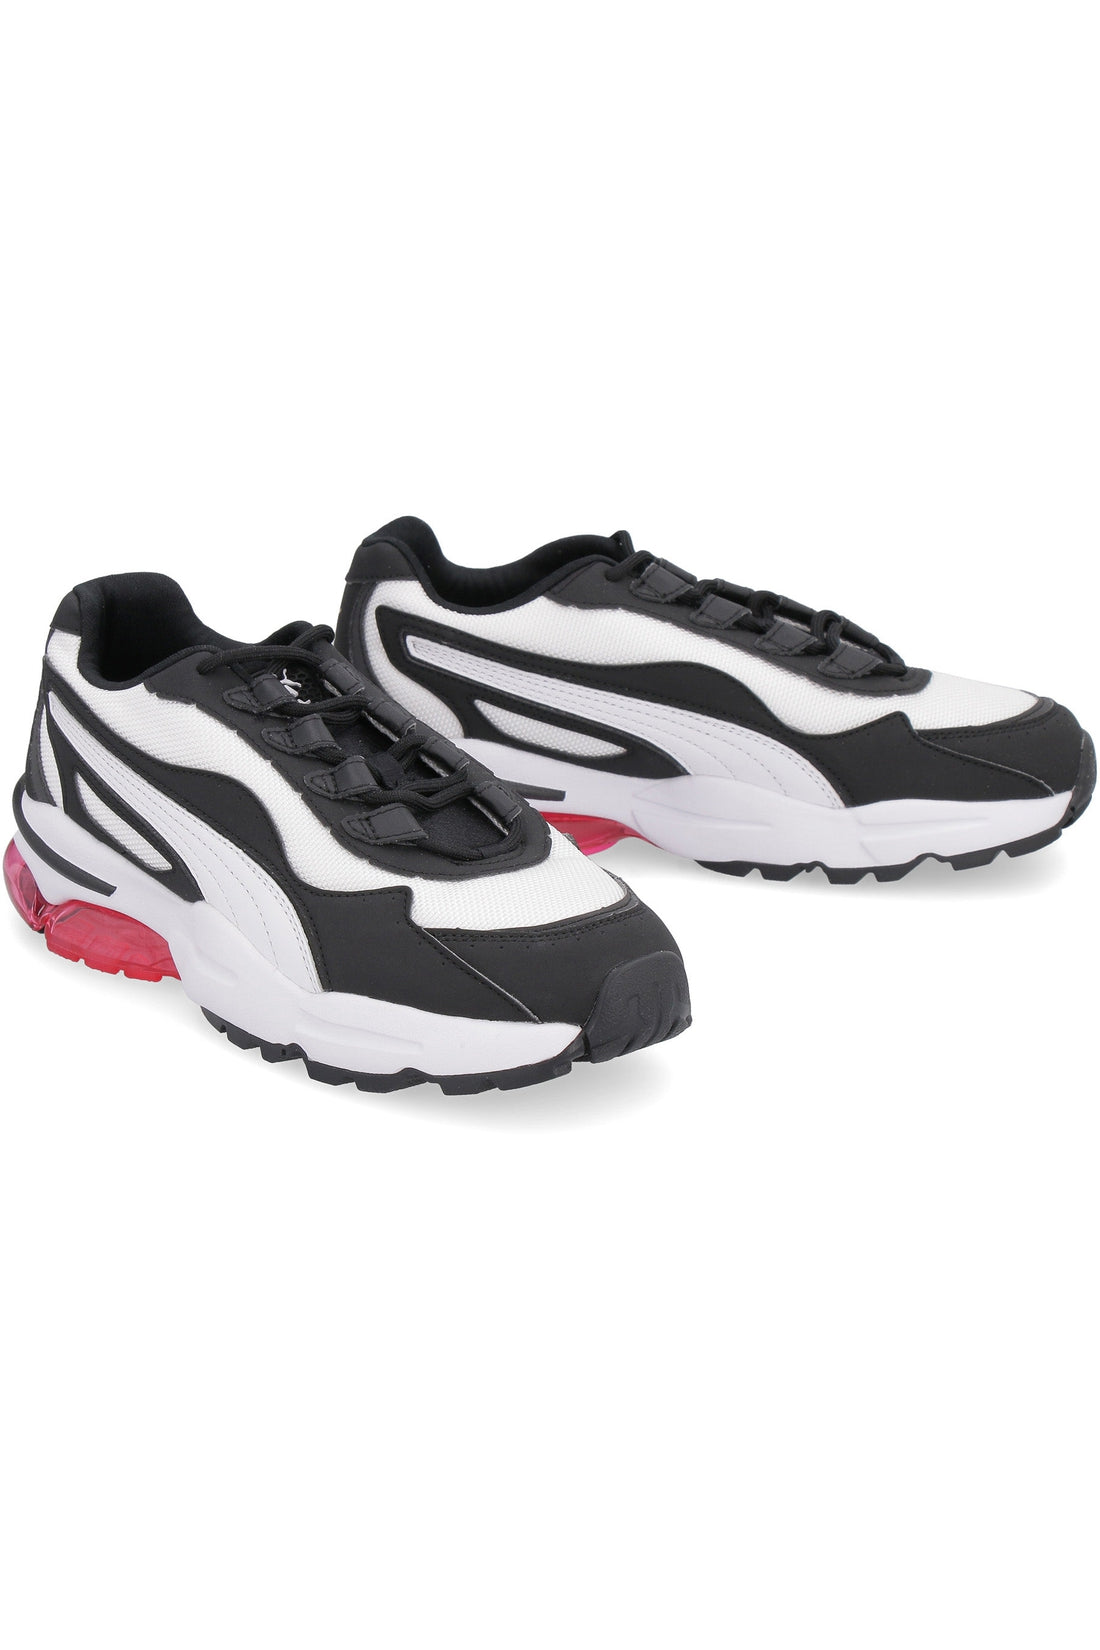 Puma-OUTLET-SALE-Cell Stellar low-top sneakers-ARCHIVIST